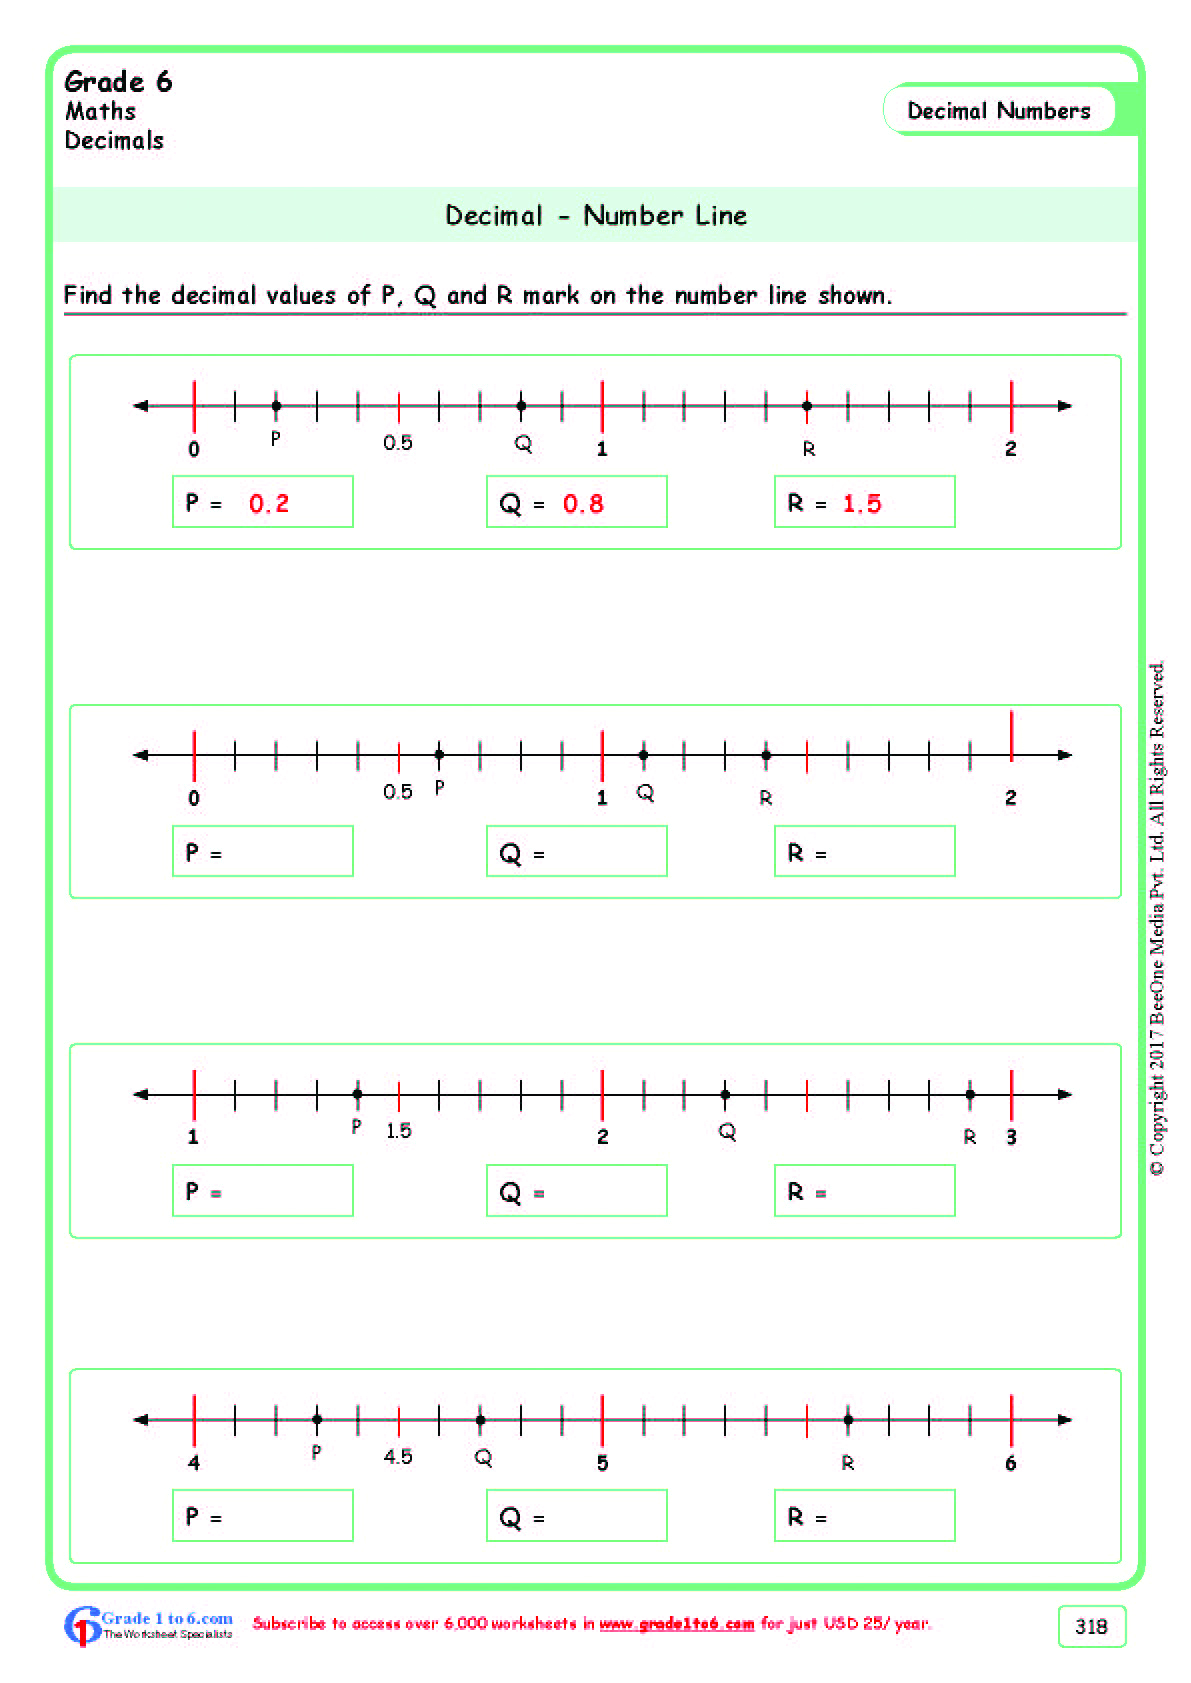 multiply-decimal-numbers-by-fractions-math-grade-6-worksheet-for-extra-grade-6-decimal